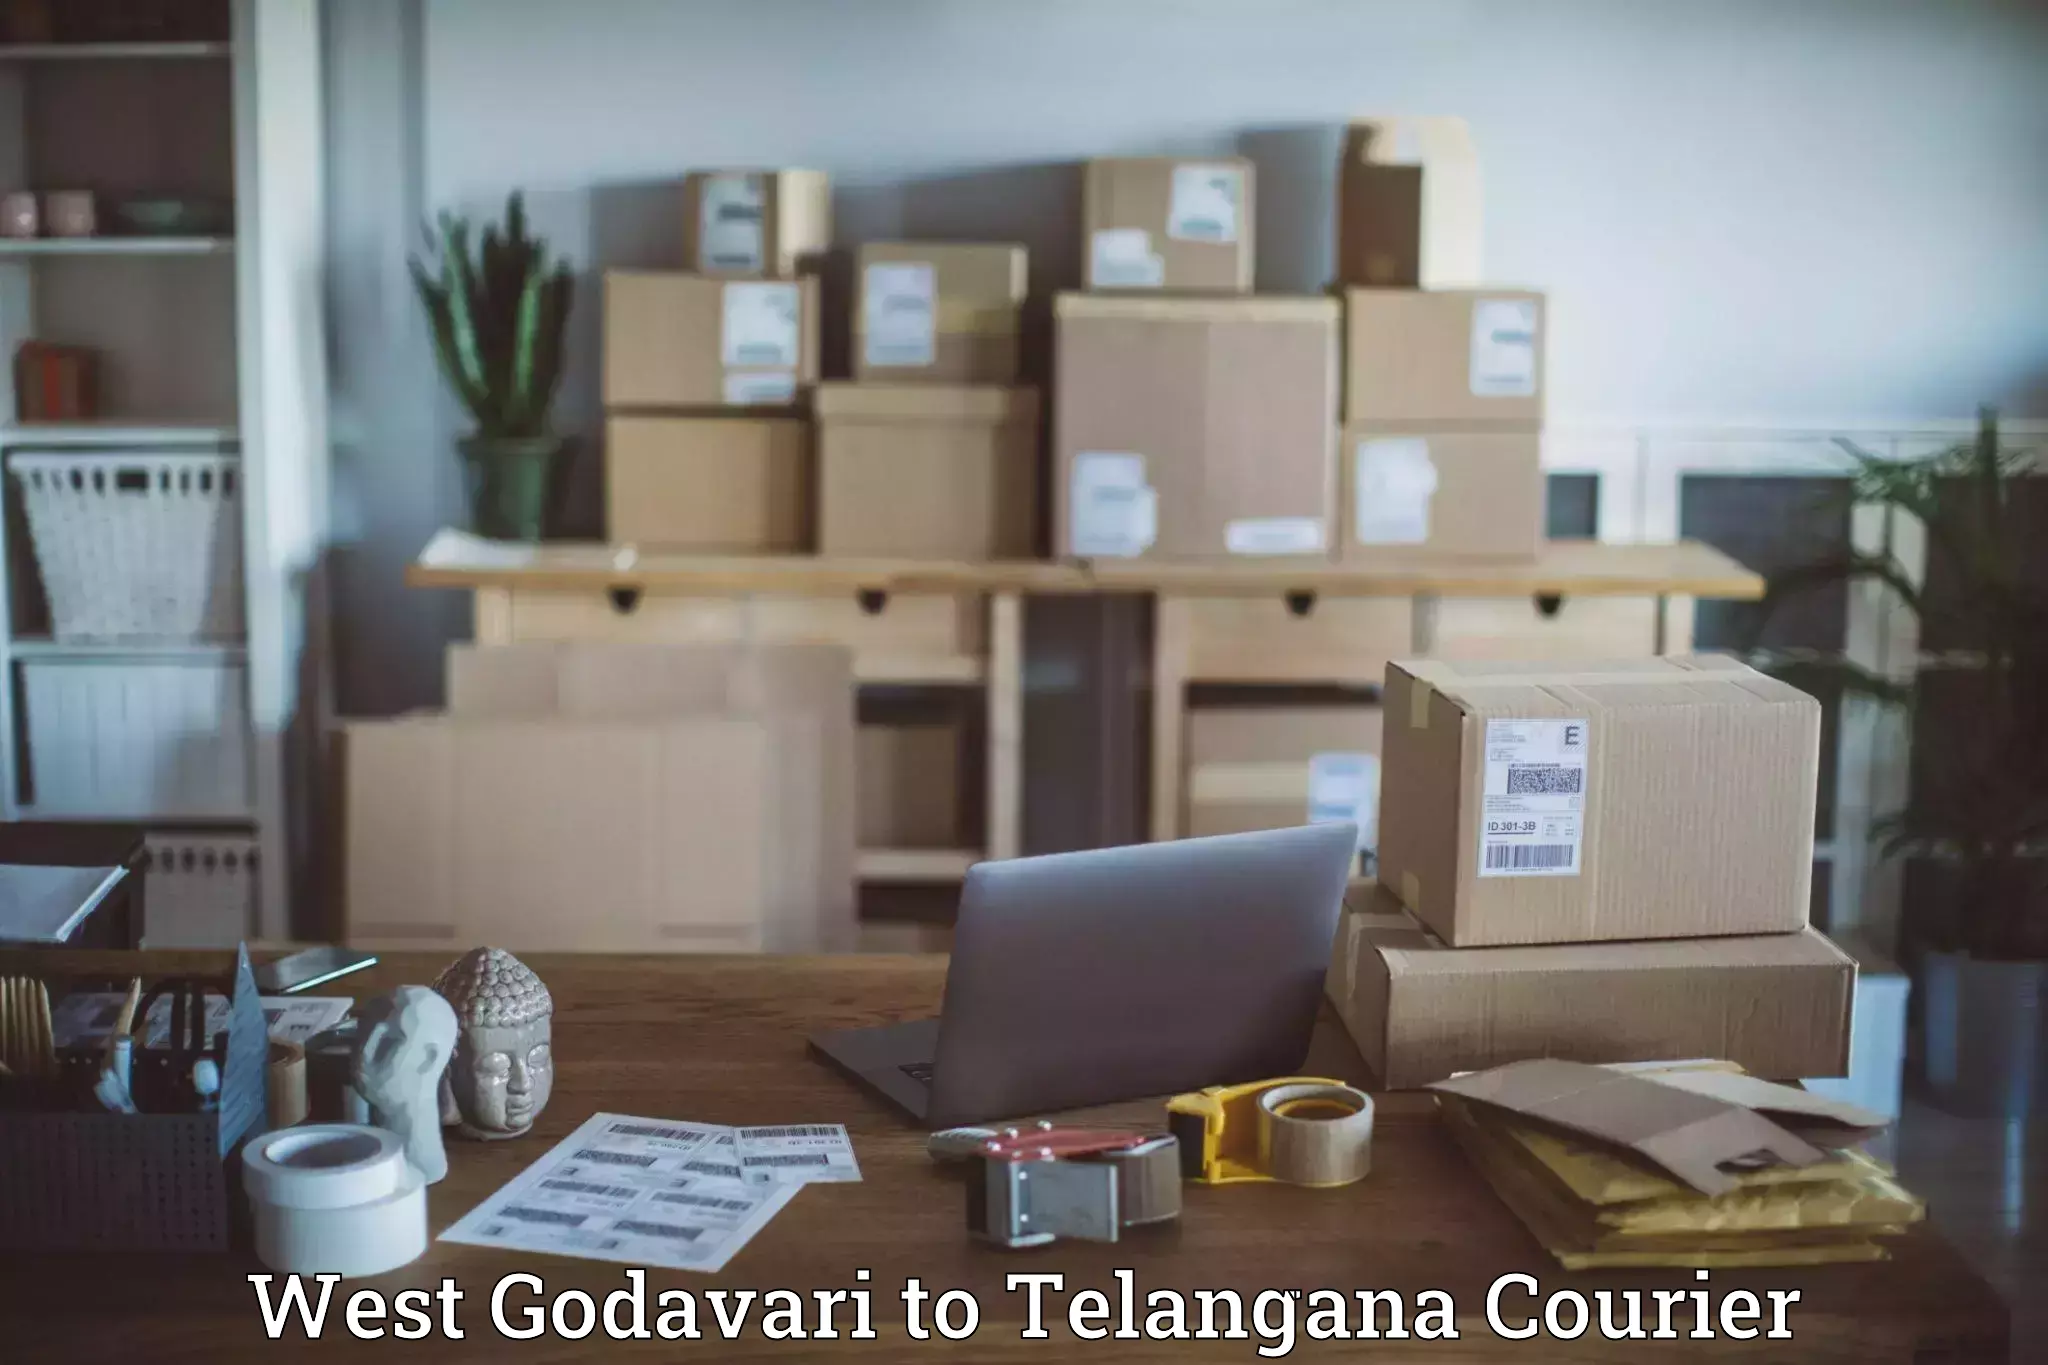 Expedited parcel delivery West Godavari to Chevella